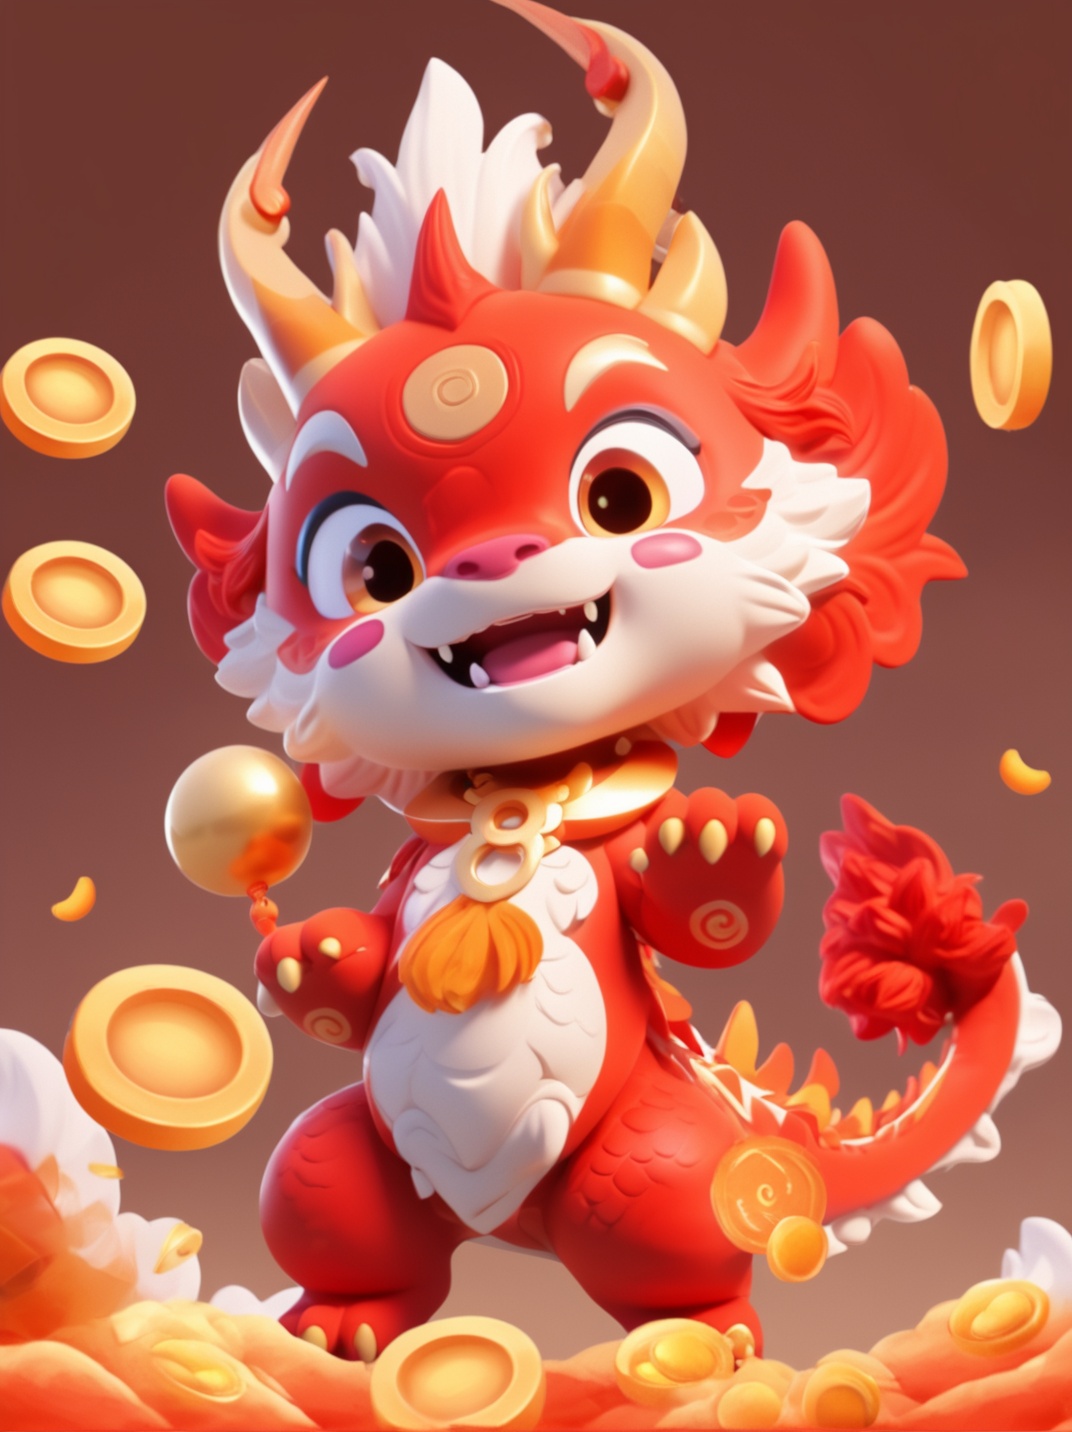 a vibrant and animated character that appears to be a fusion of a dragon and a lion. The creature has a bright red body with white and orange accents, large expressive eyes, and a playful expression. It has a pair of golden horns on its head and a golden collar around its neck. The character is surrounded by golden coins, which are floating in the air around it. The background is a gradient of warm colors, transitioning from a deep orange at the top to a lighter hue at the bottom<lora:LONG IP:1>